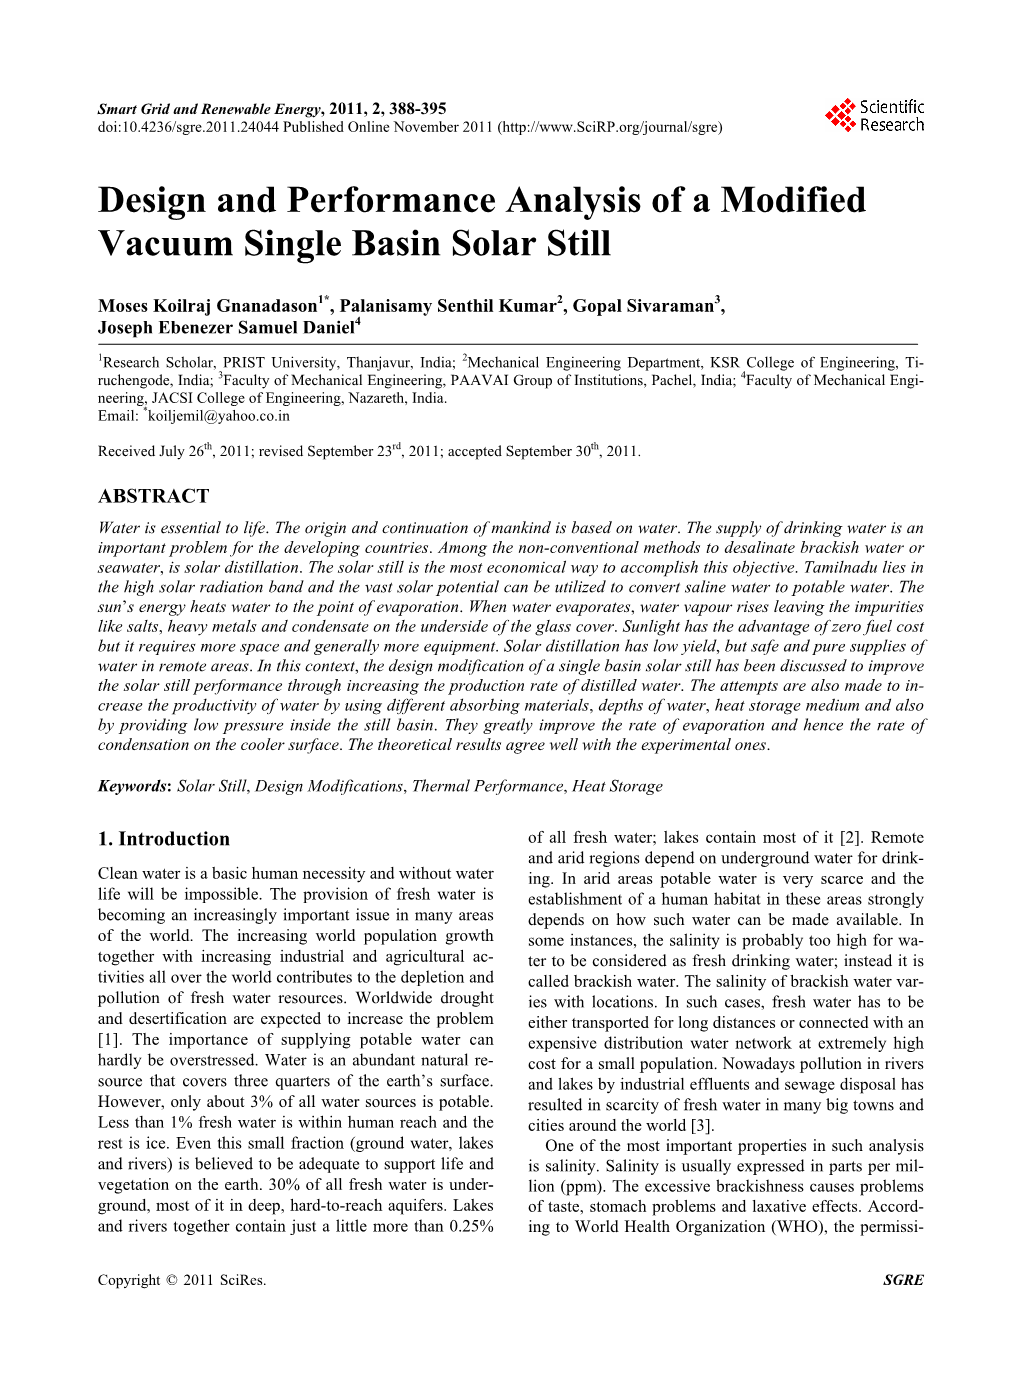 Design and Performance Analysis of a Modified Vacuum Single Basin Solar Still